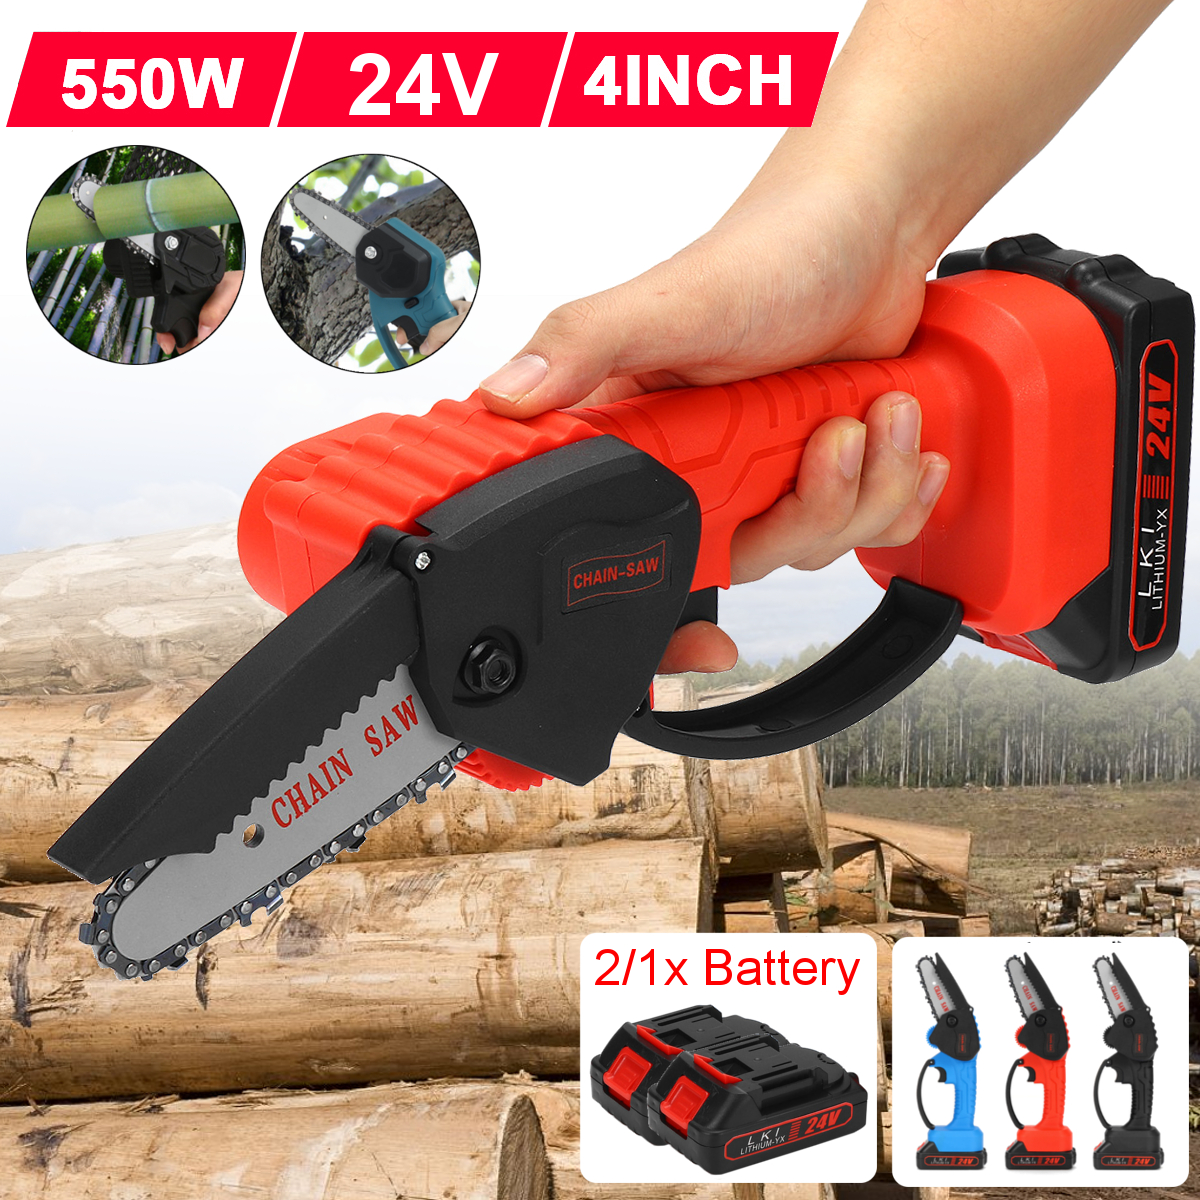 24V-4-Inch-One-Hand-Electric-Chain-Saw-Woodworking-Chainsaw-550W-Cordless-Wood-Saws-Cutter-W-1-or-2--1797421-2